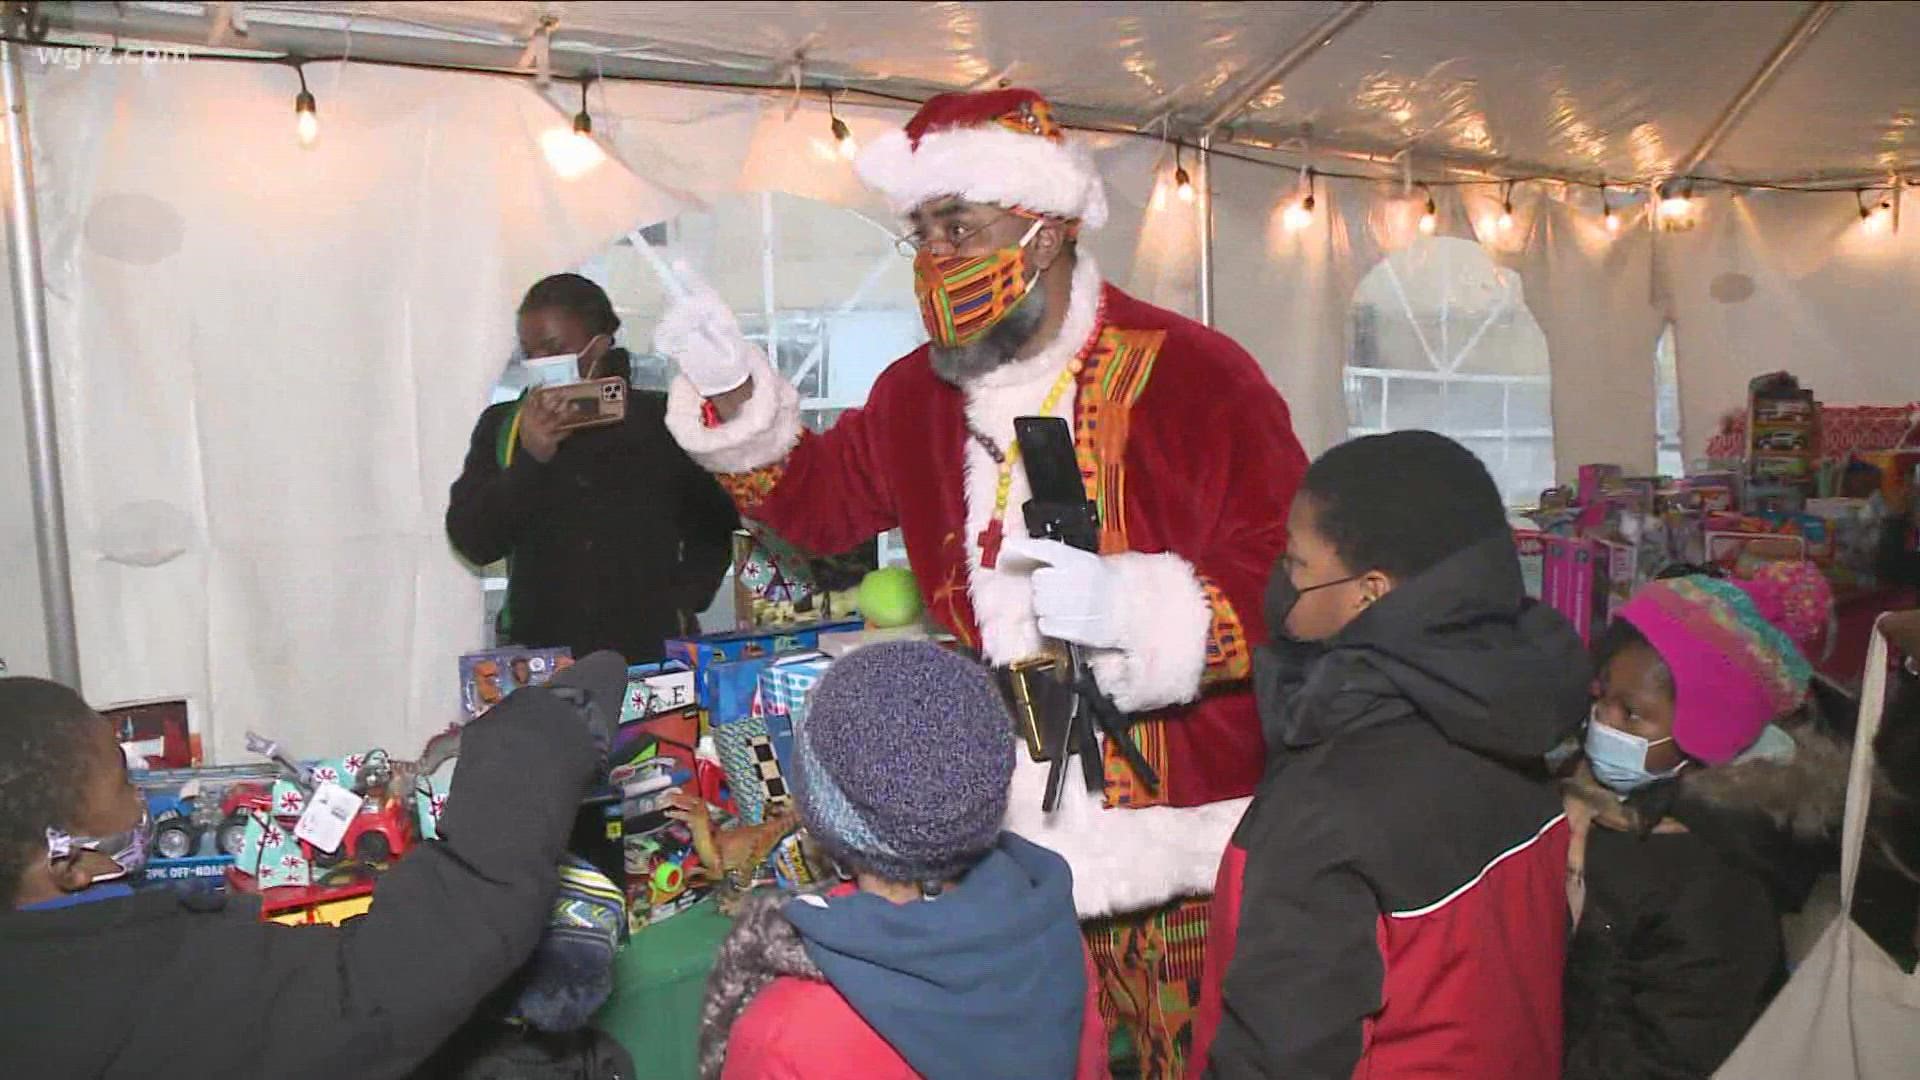 From tree lightings to toy giveaways, kids got the chance to get some early gifts at radio station WUFO downtown.